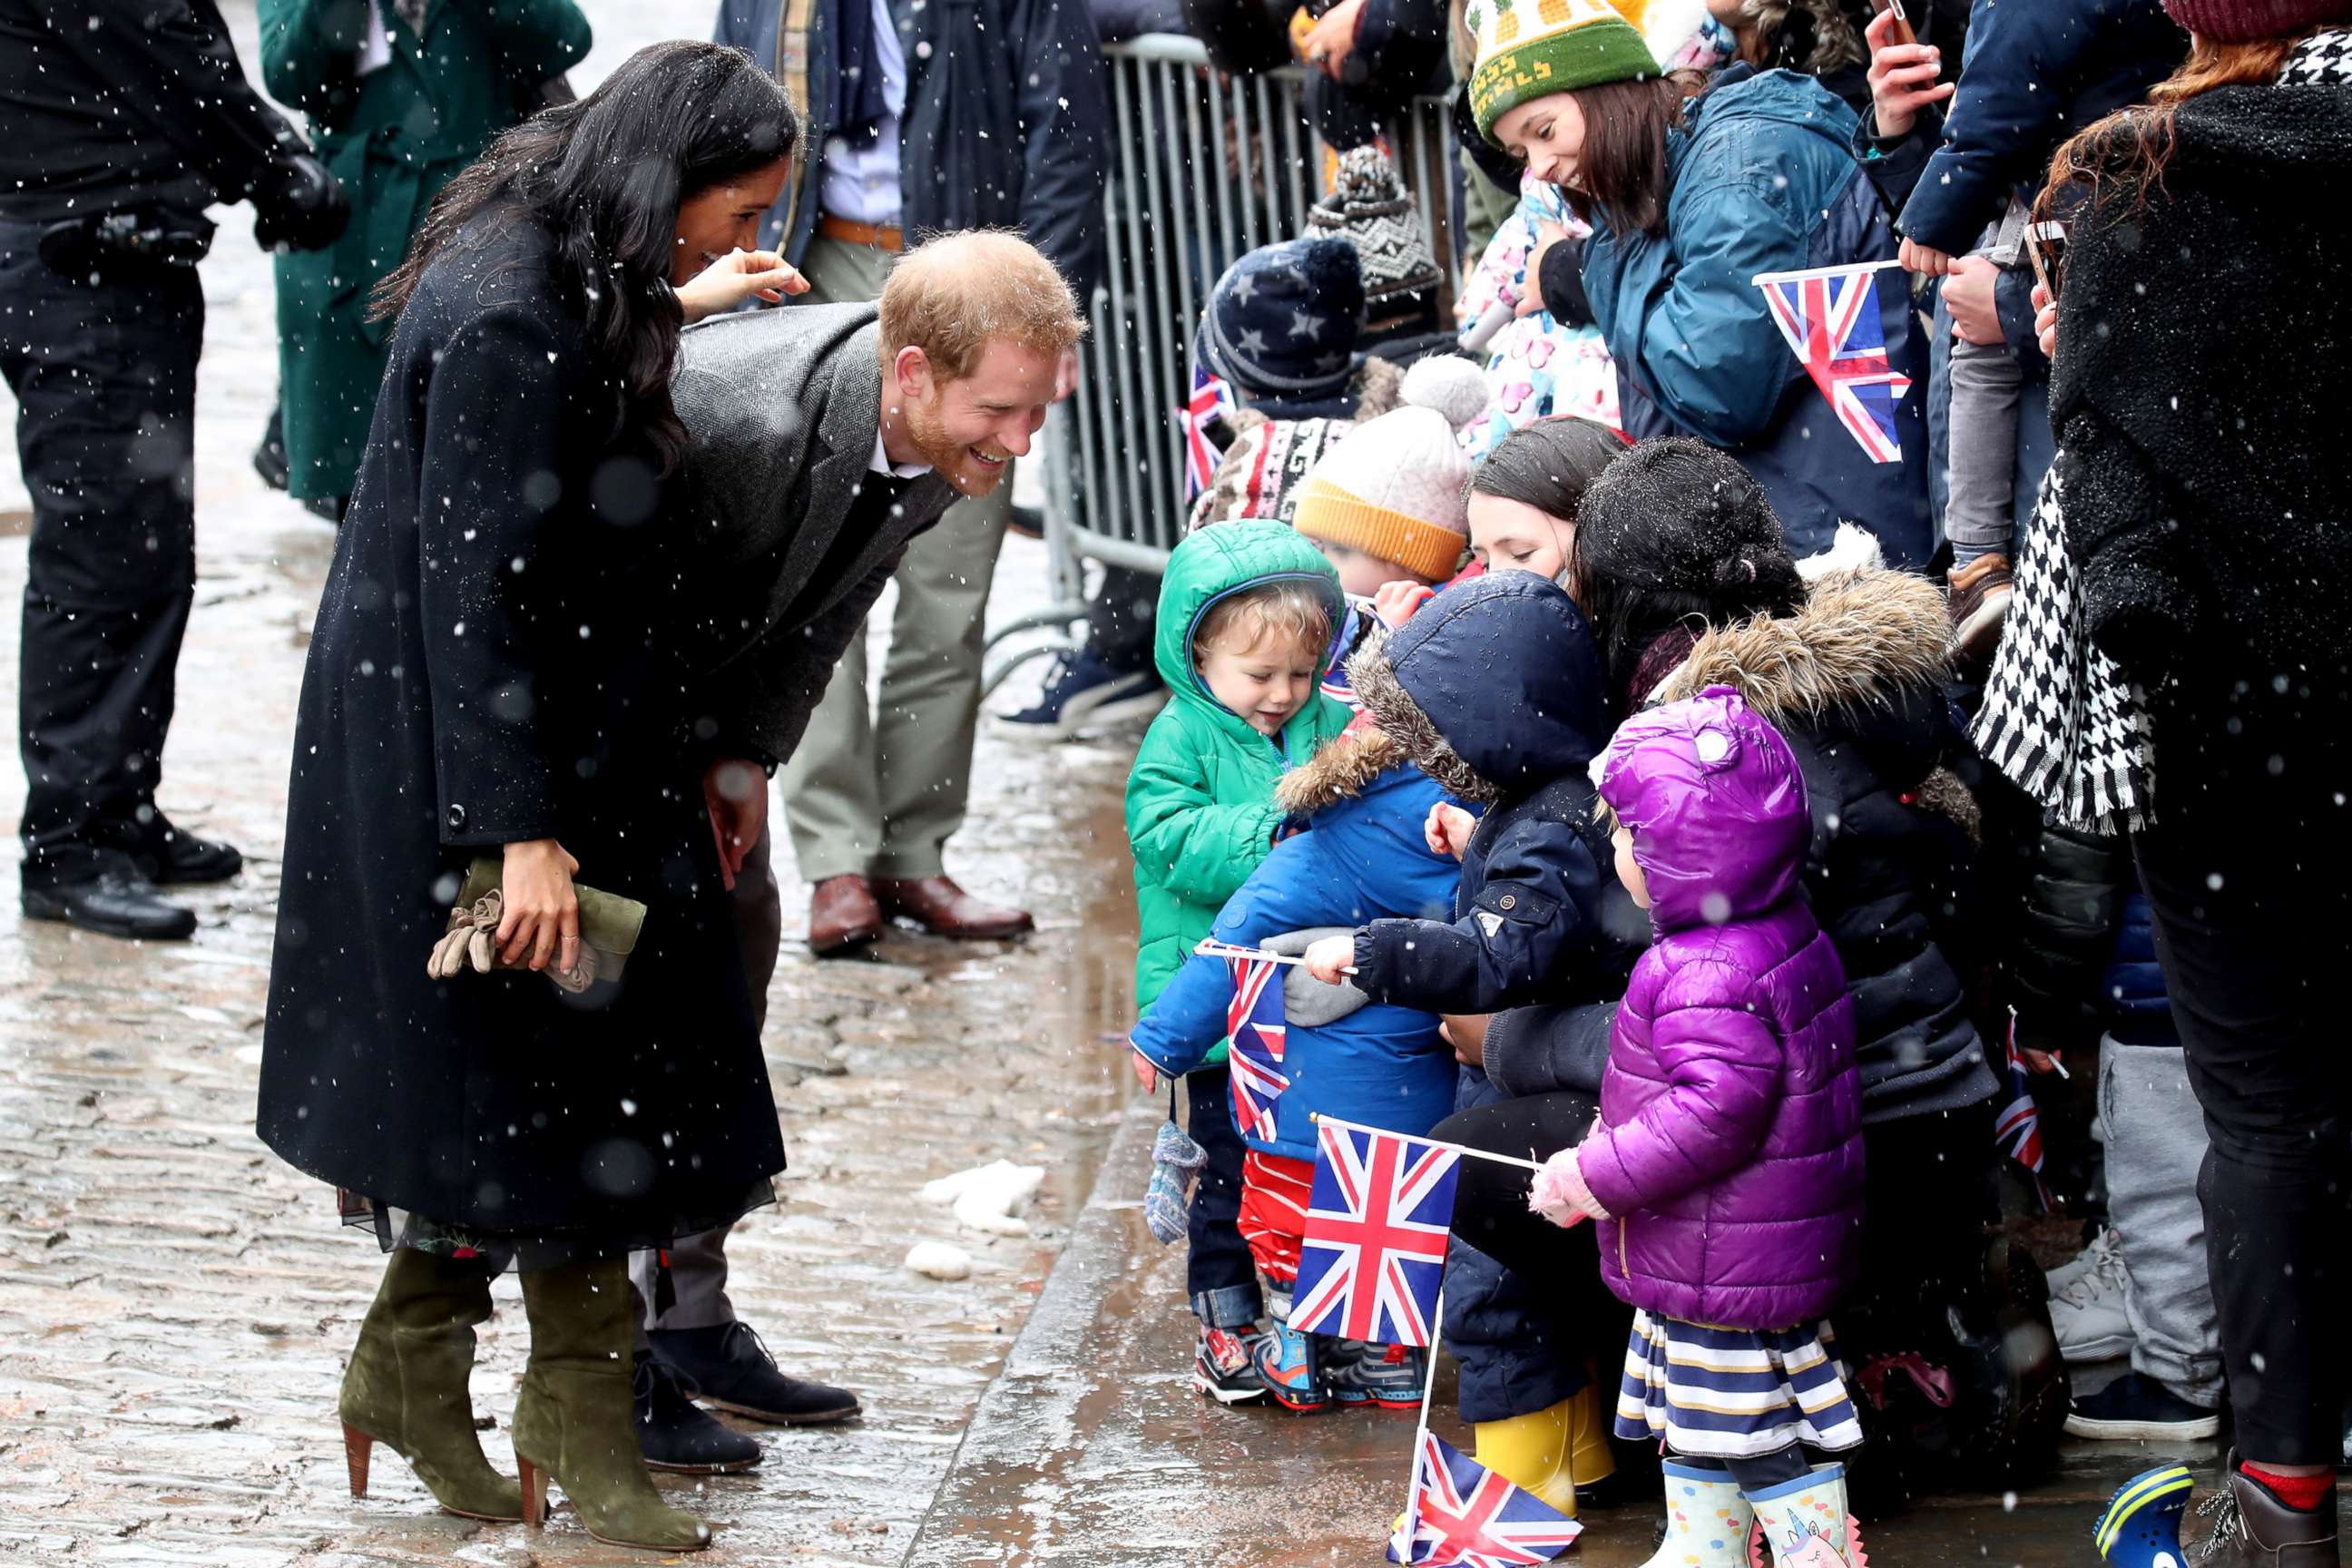 PHOTO: Meghan, Duchess of Sussex and Prince Harry, Duke of Sussex meet children in the crowd as they arrive at the Bristol Old Vic, Feb. 1, 2019, in Bristol, England.